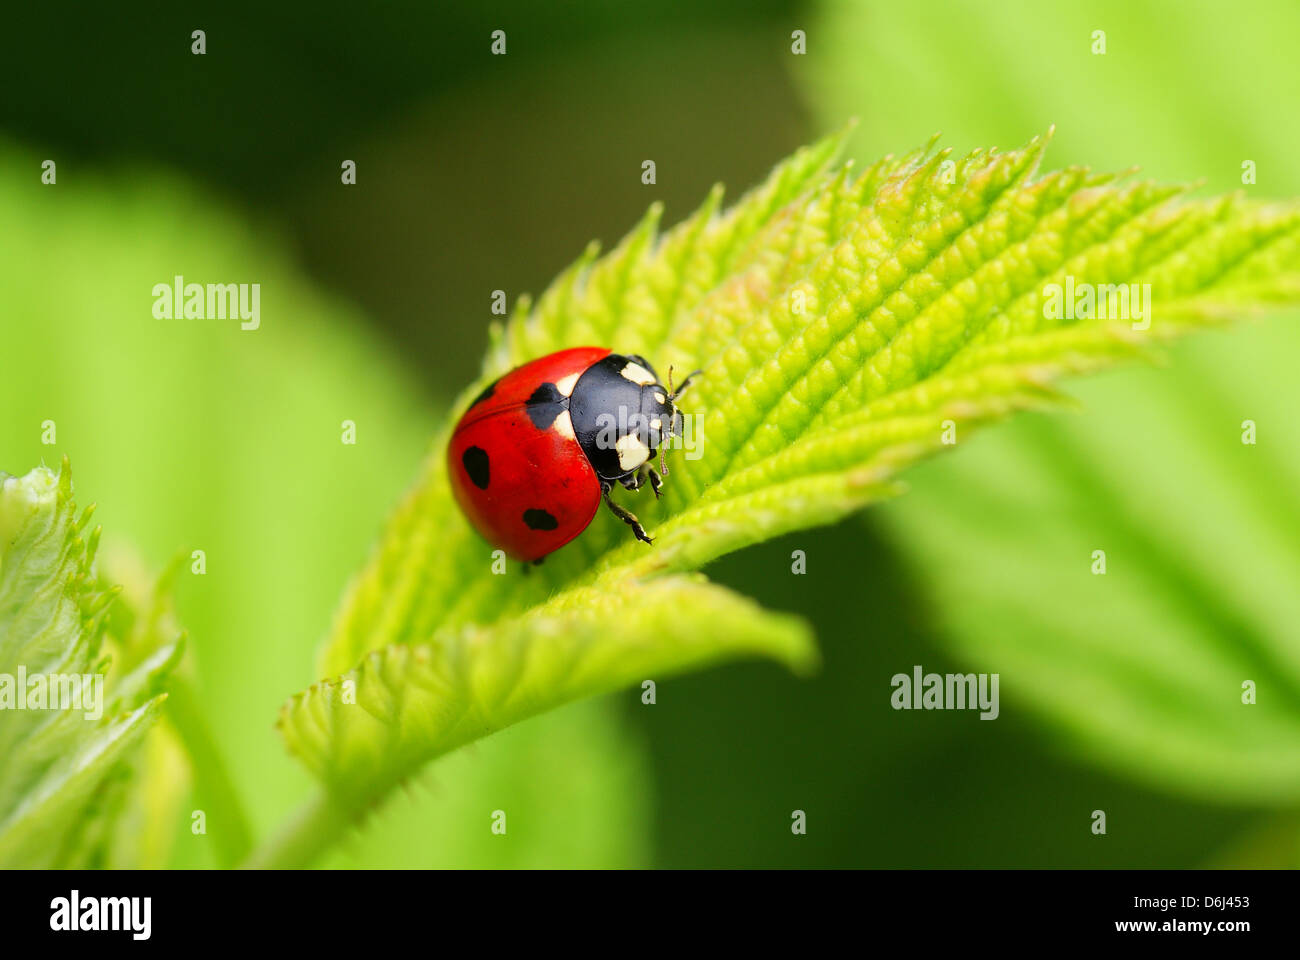 red speckled ladybird on the leaf Stock Photo